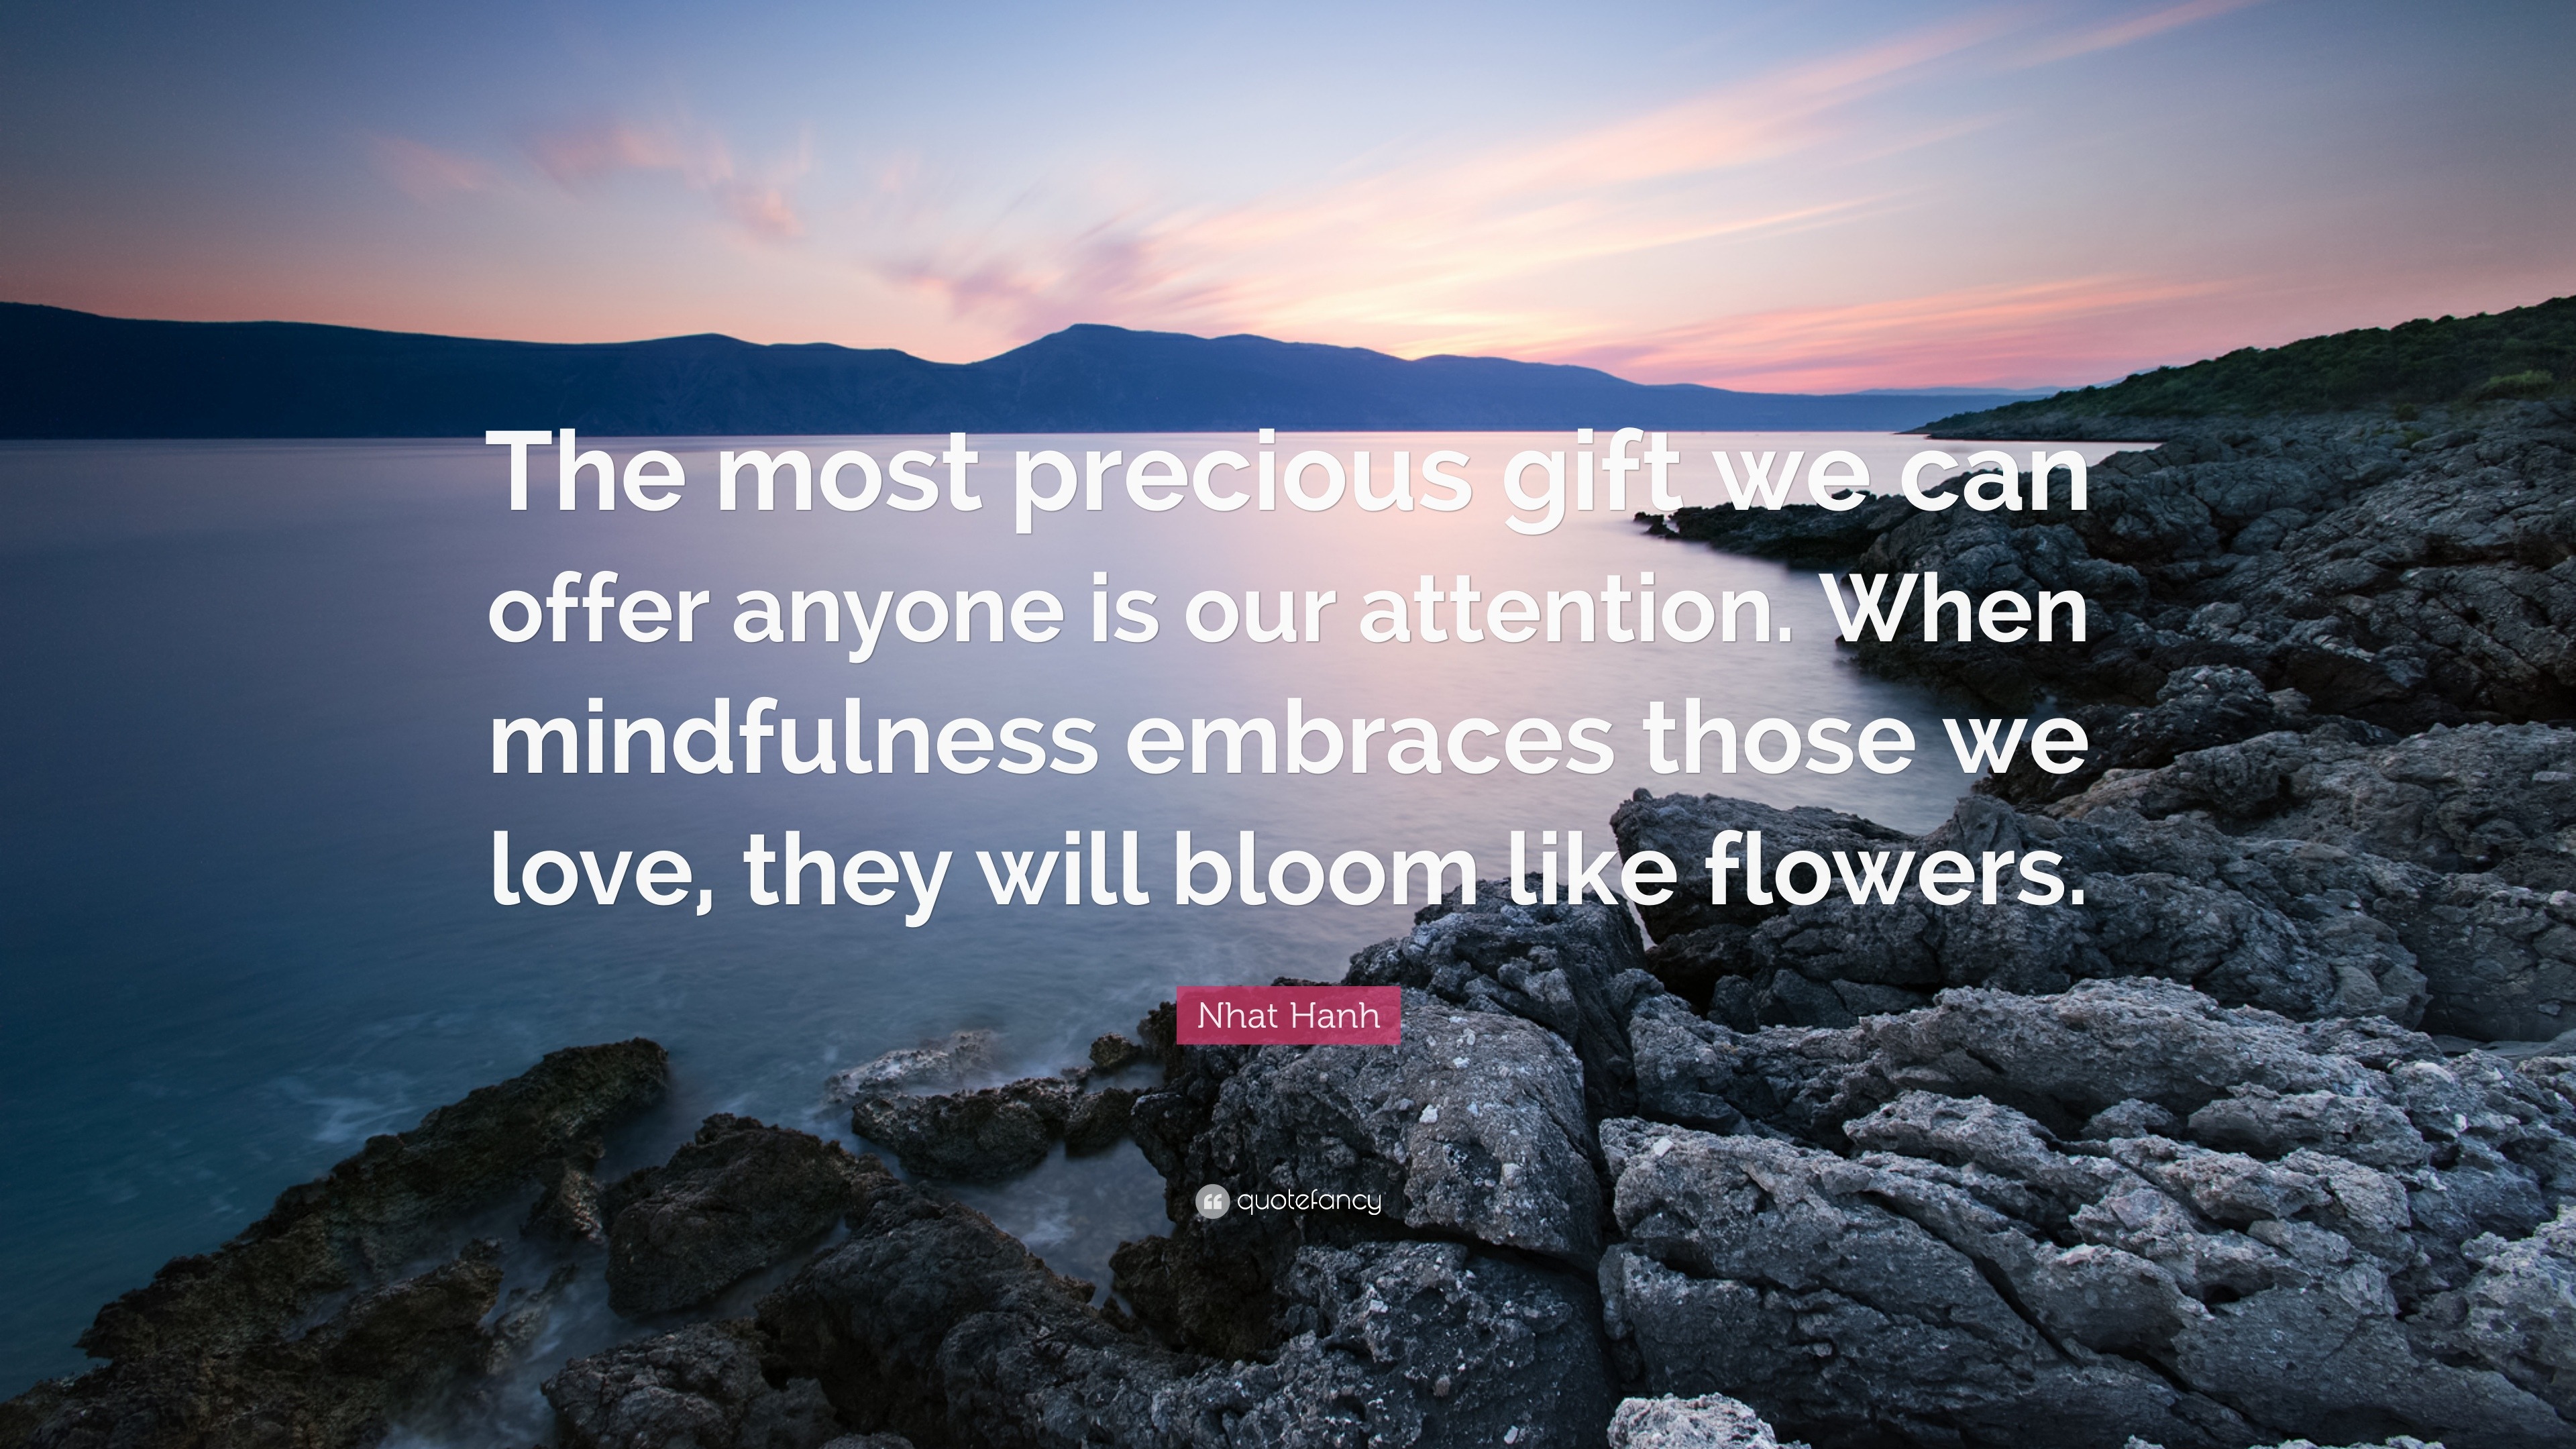 Nhat Hanh Quote: “The most precious gift we can offer anyone is our ...